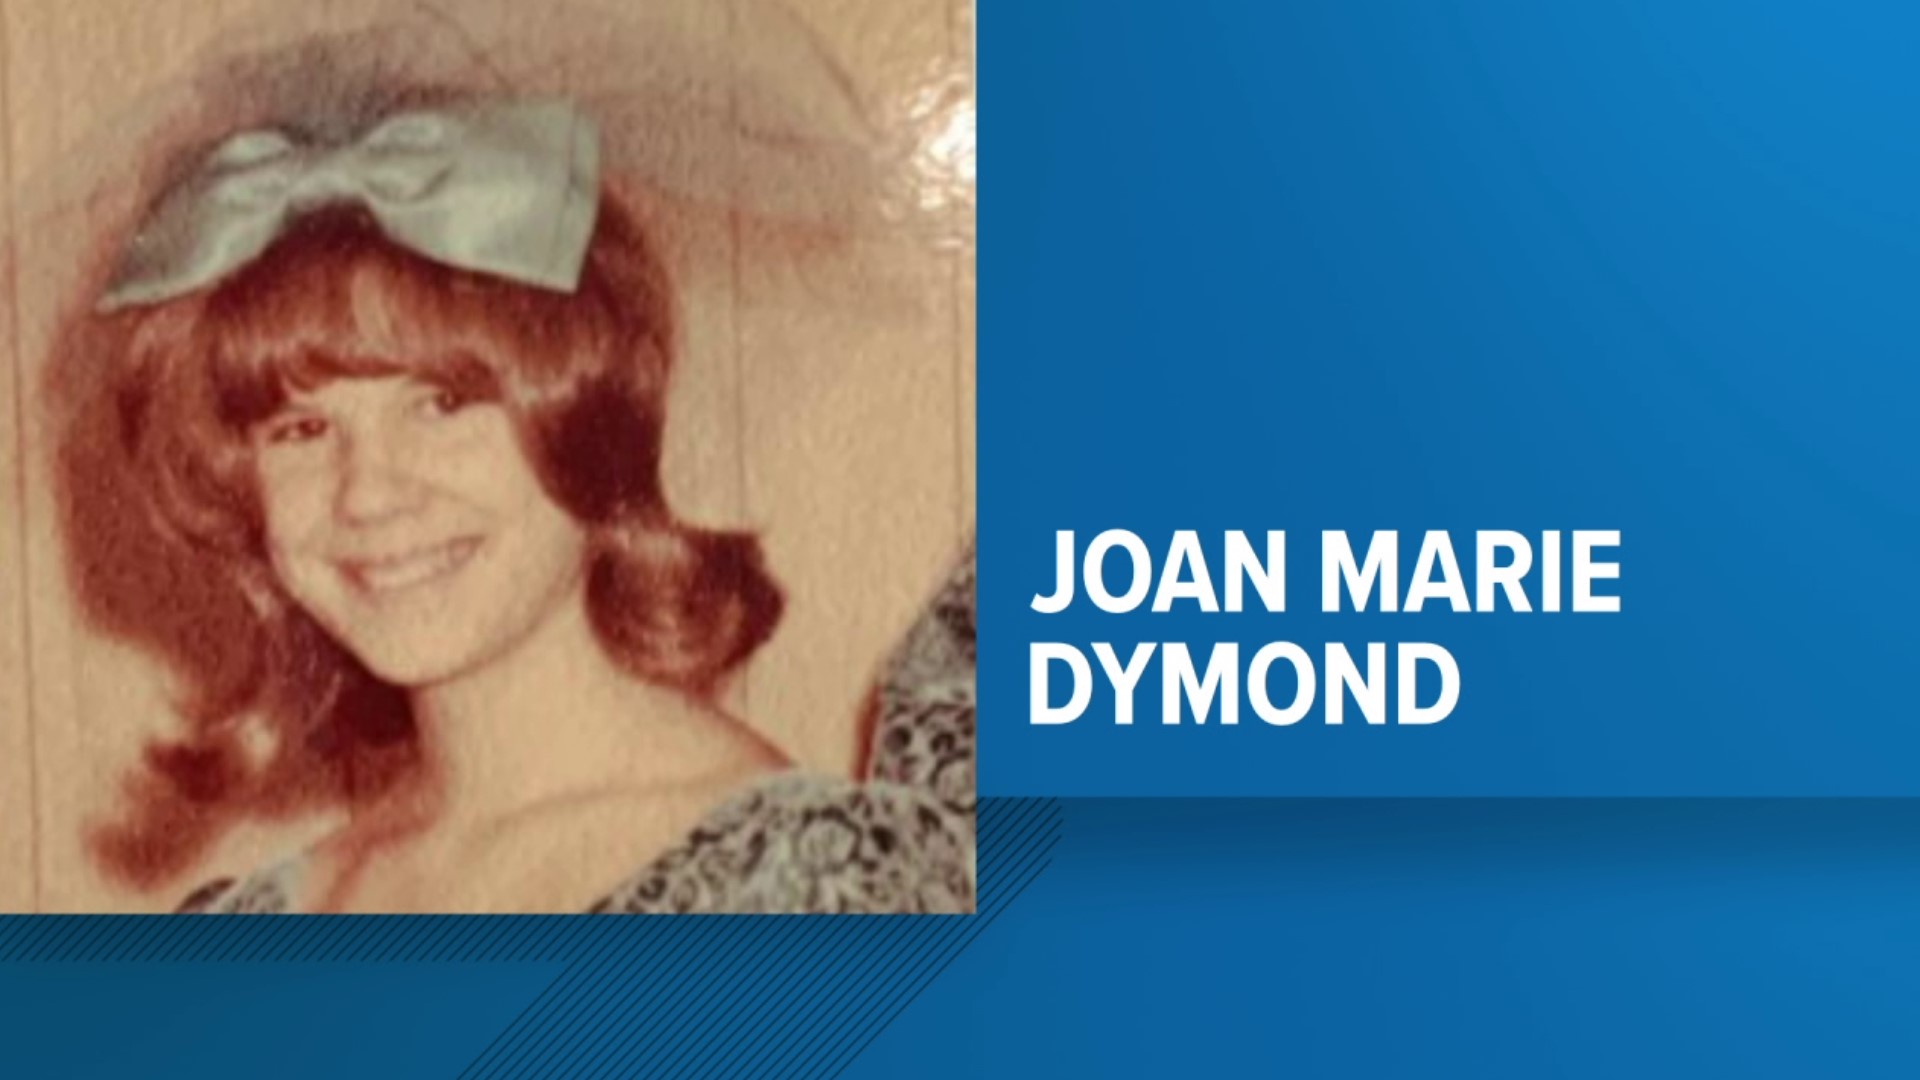 Joan Dymond's remains were found in 2012 and were positively identified last year.